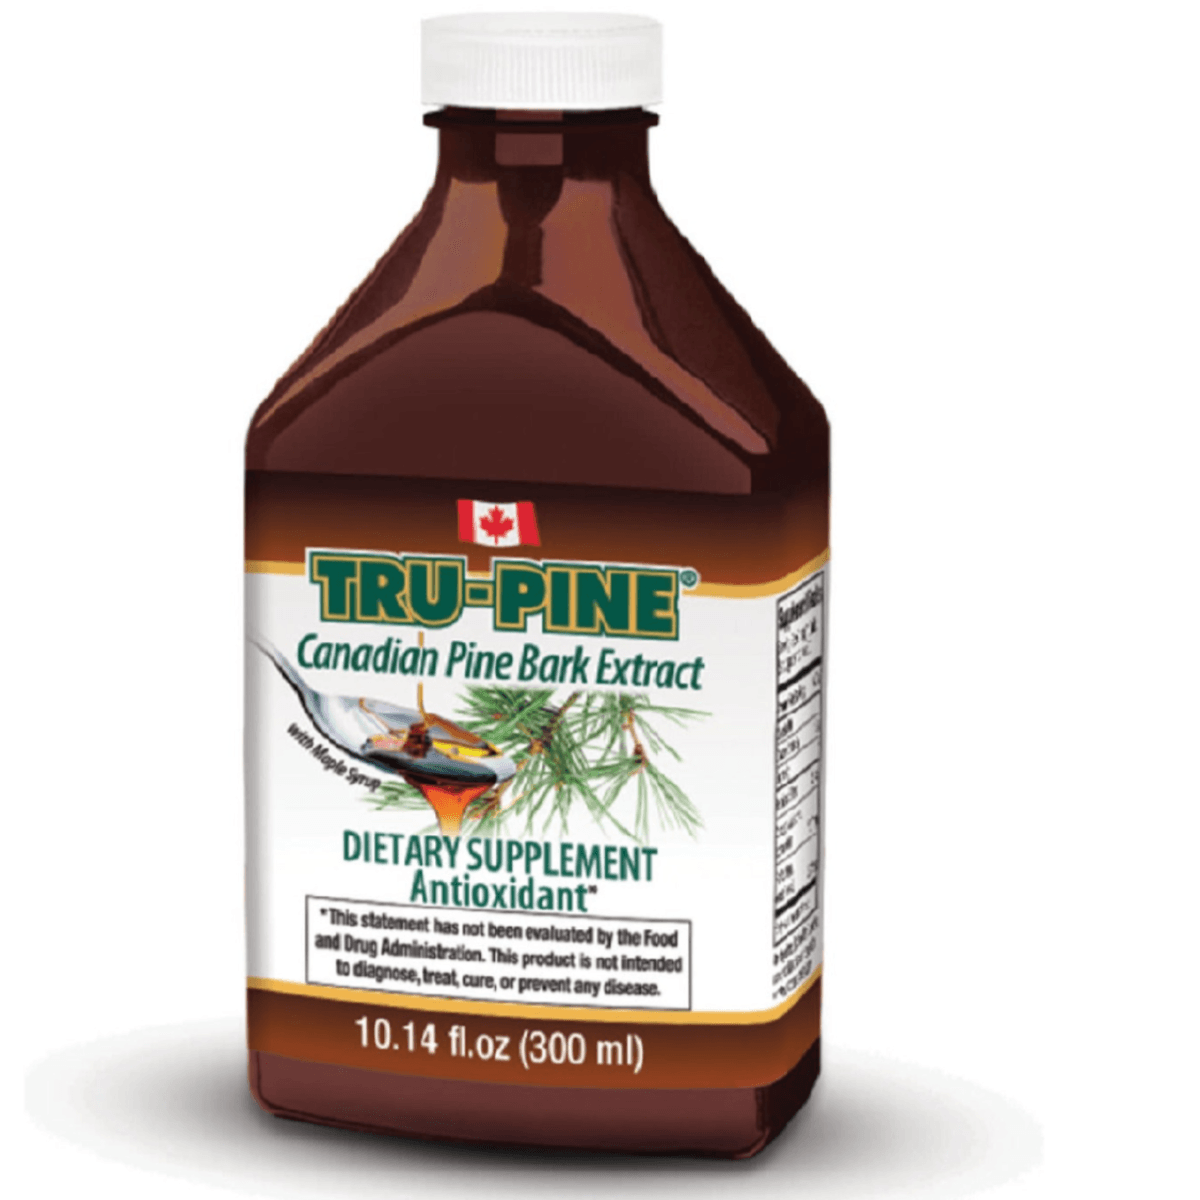 Tru Pine Canadian Pine Bark Extract 300mL Supplements at Village Vitamin Store